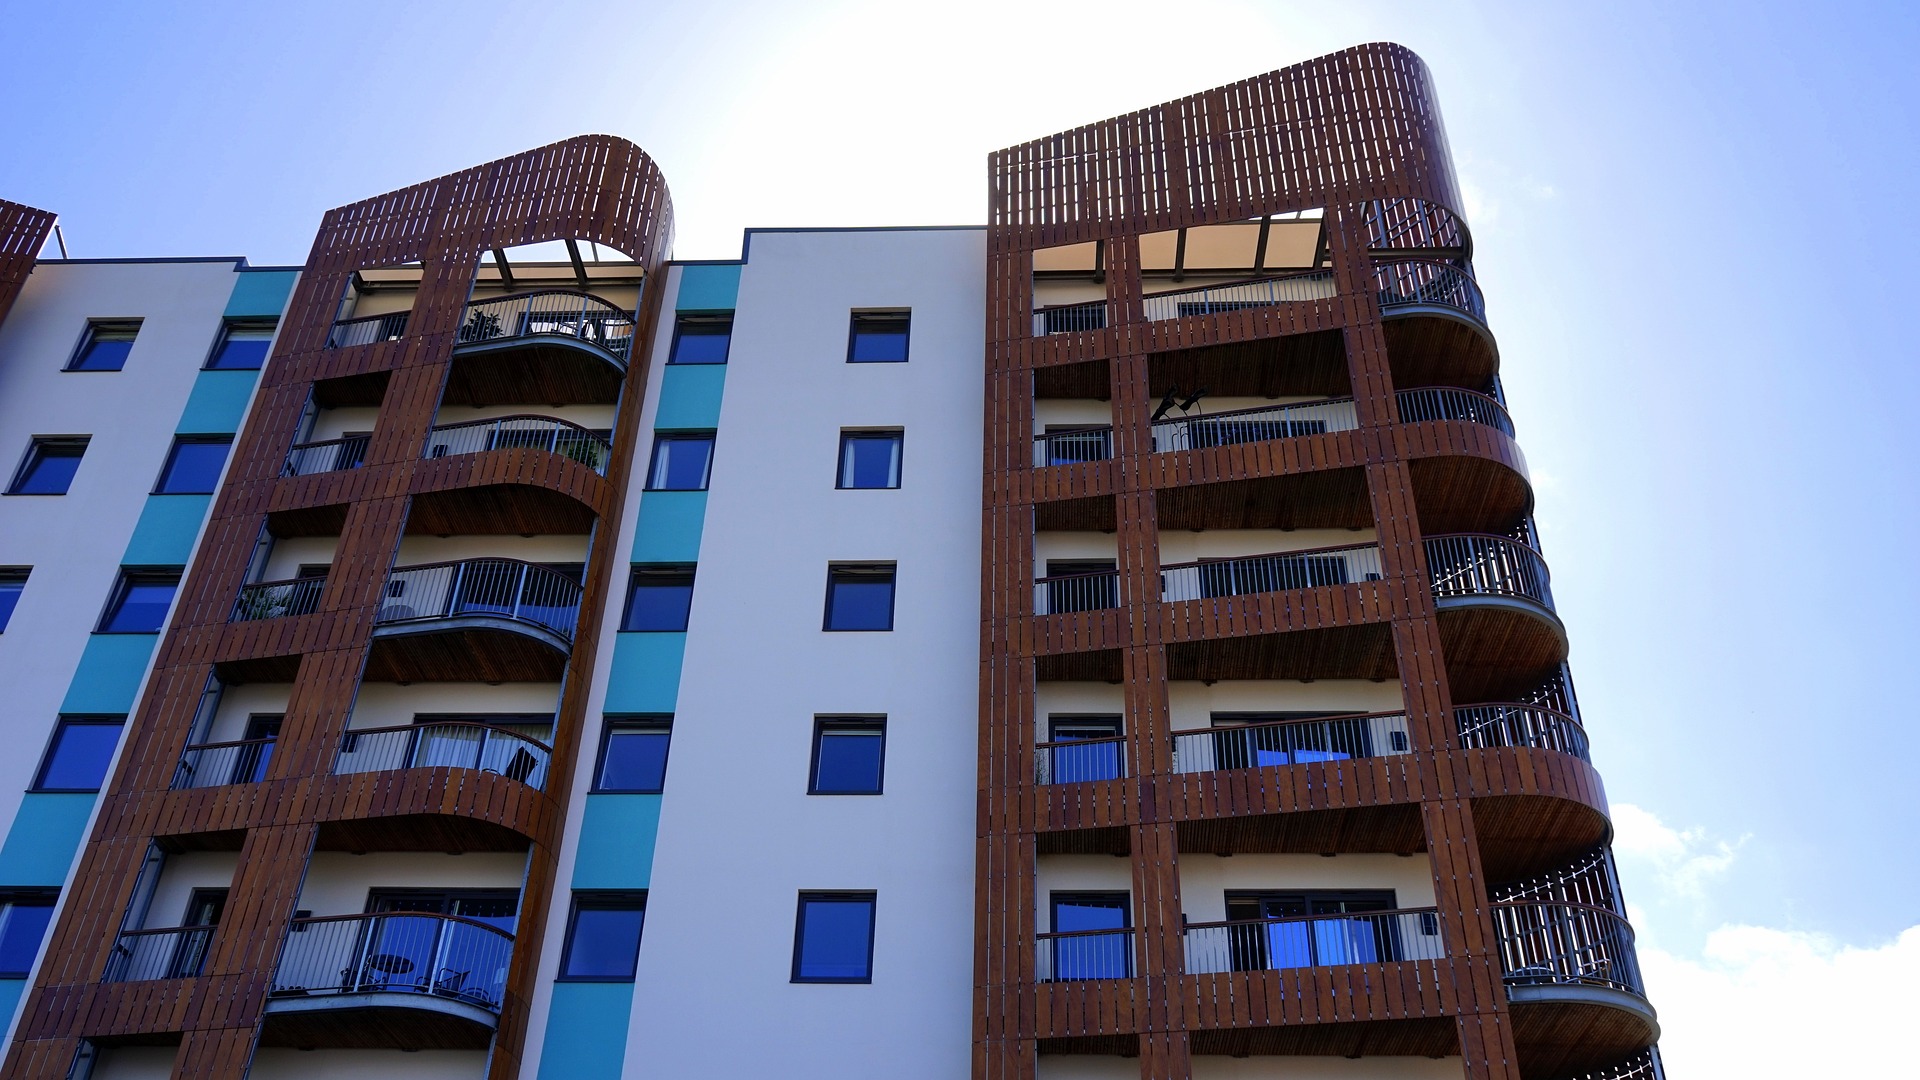 a block of flats that is more than 6 floors high, with balconies